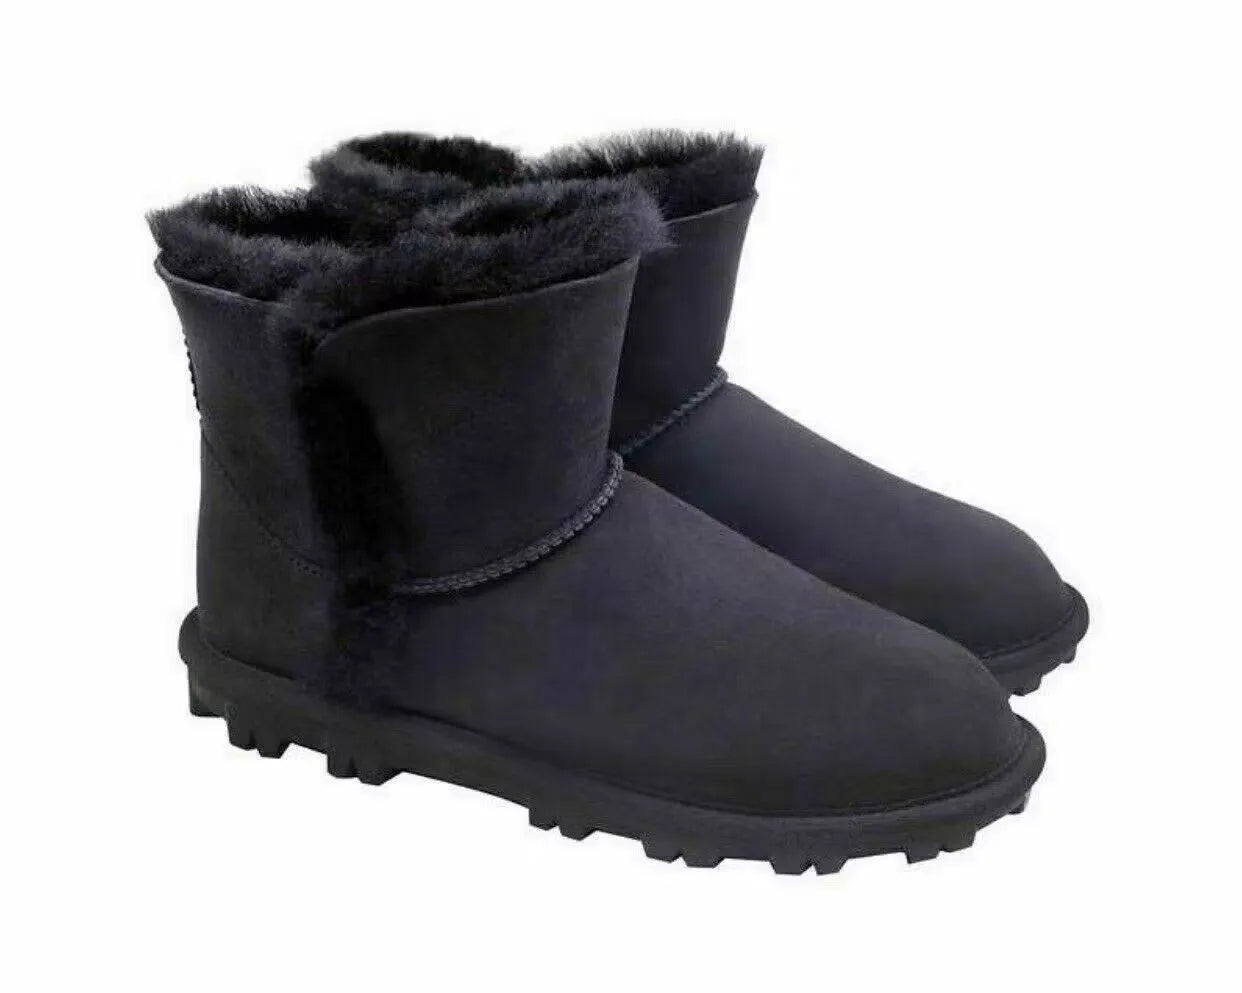 Cozy up in style with Kirkland Signature Ladies' Shearling Boots! These black boots feature a warm, fluffy lining for ultimate comfort. Shop on Dubailisit!